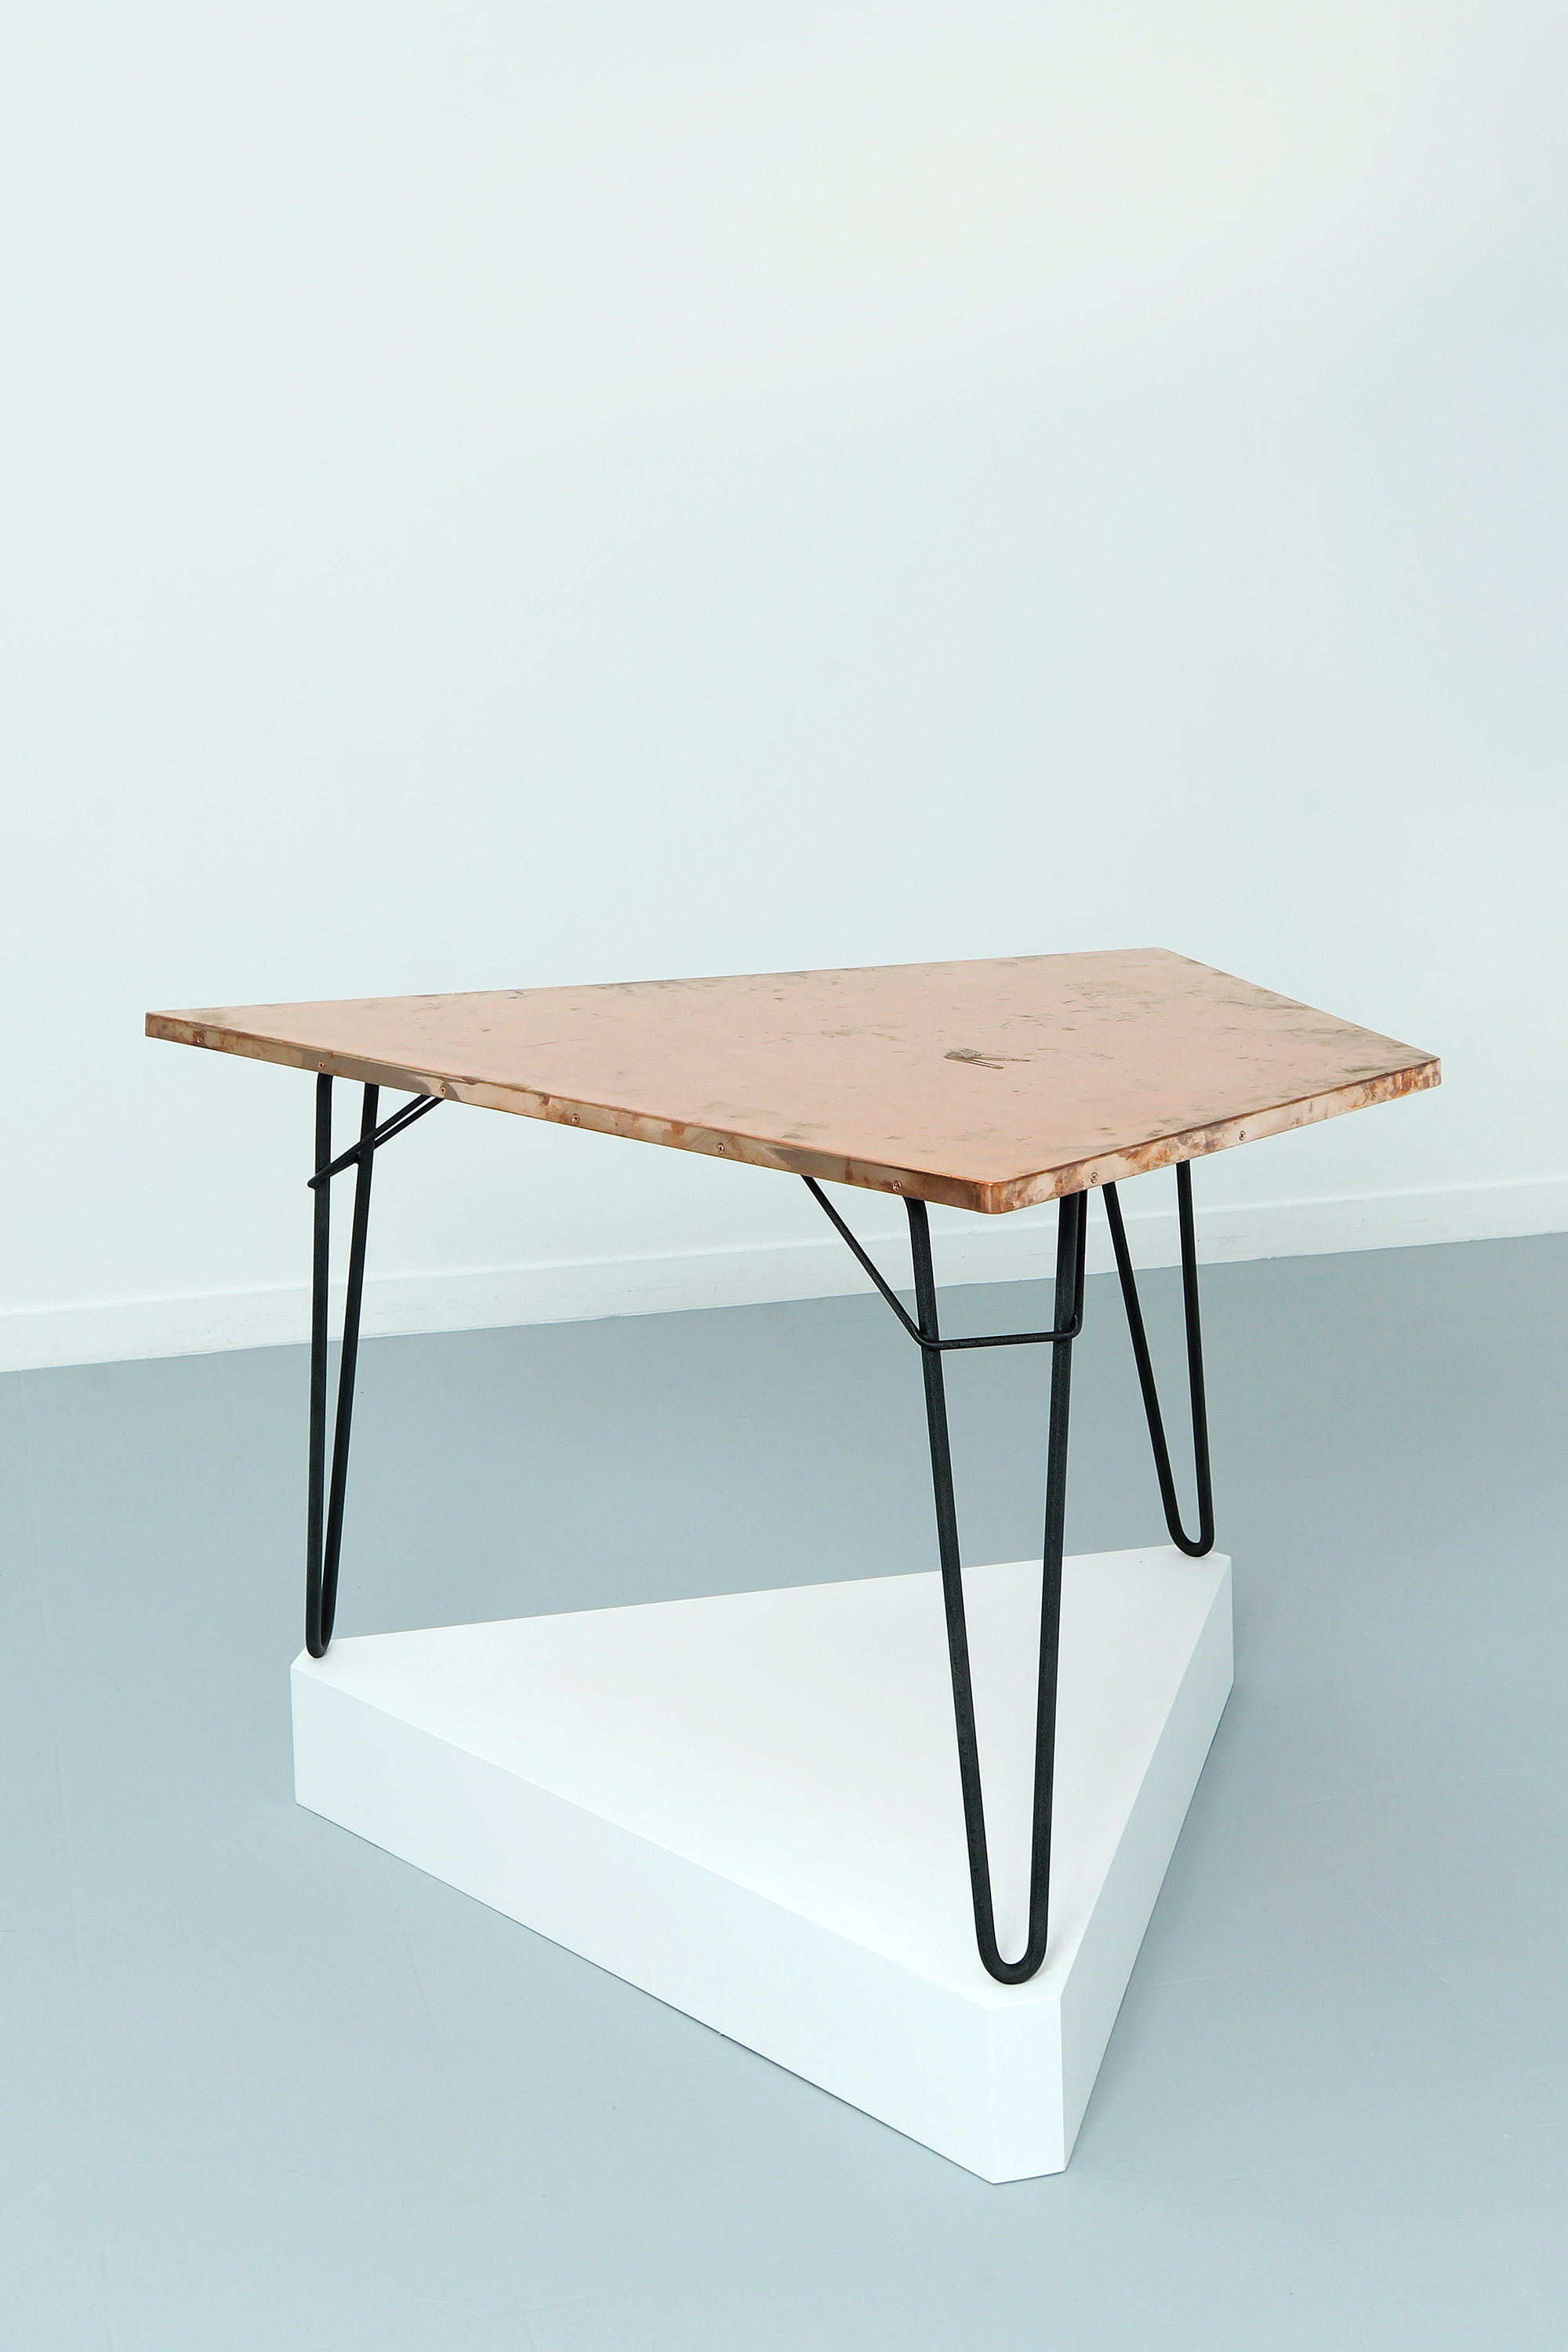   Copper Surrogate (Table: designed by Willy Van der Meeren, 1958; Galerie Rodolphe Janssen, Brussels, Belgium, August 10th–September 2nd, 2011)   2011  Polished copper table top and powder-coat steel  Table: 39 3/4 x 26 1/2 x 1 inches   Surrogates (